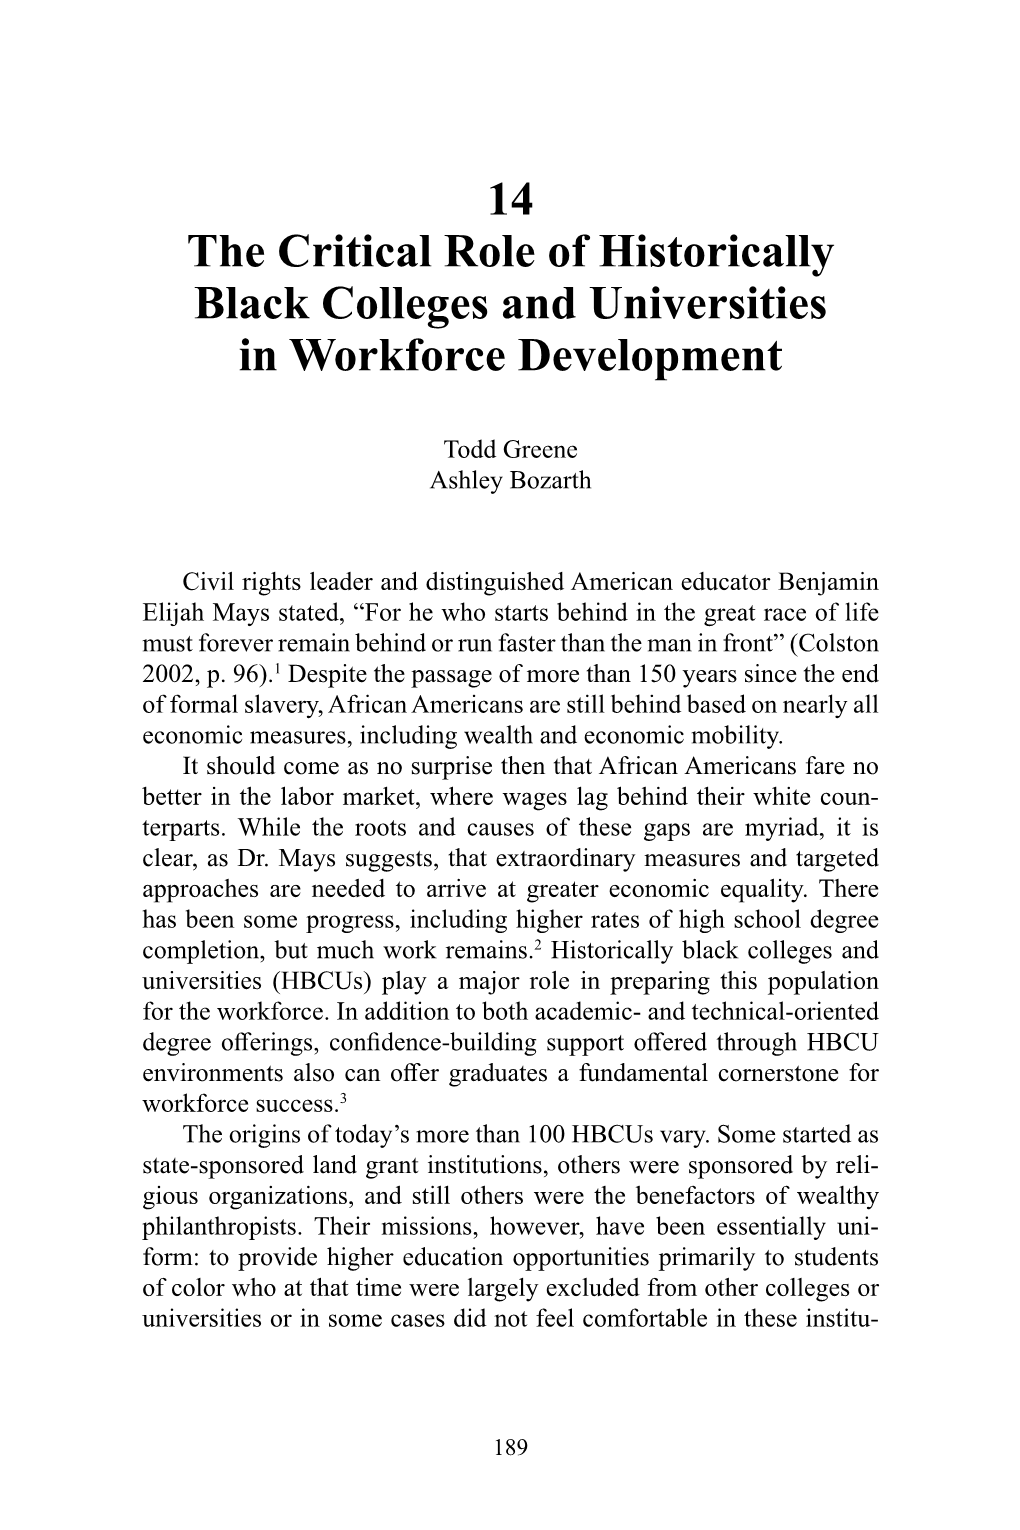 14 the Critical Role of Historically Black Colleges and Universities in Workforce Development